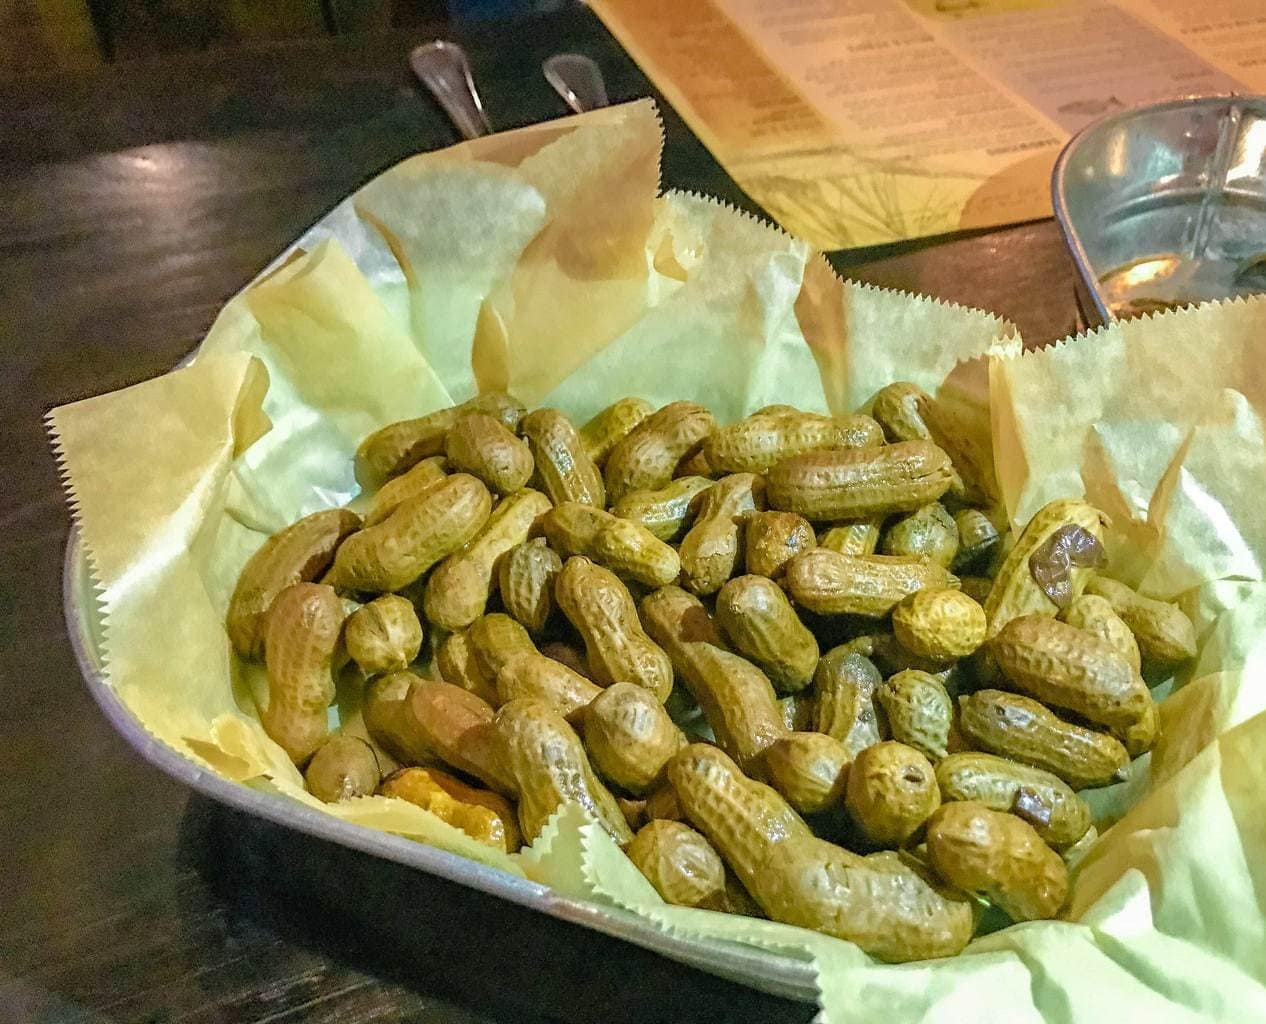 The Big Ketch in Roswell, Boiled Peanuts at the Big Ketch